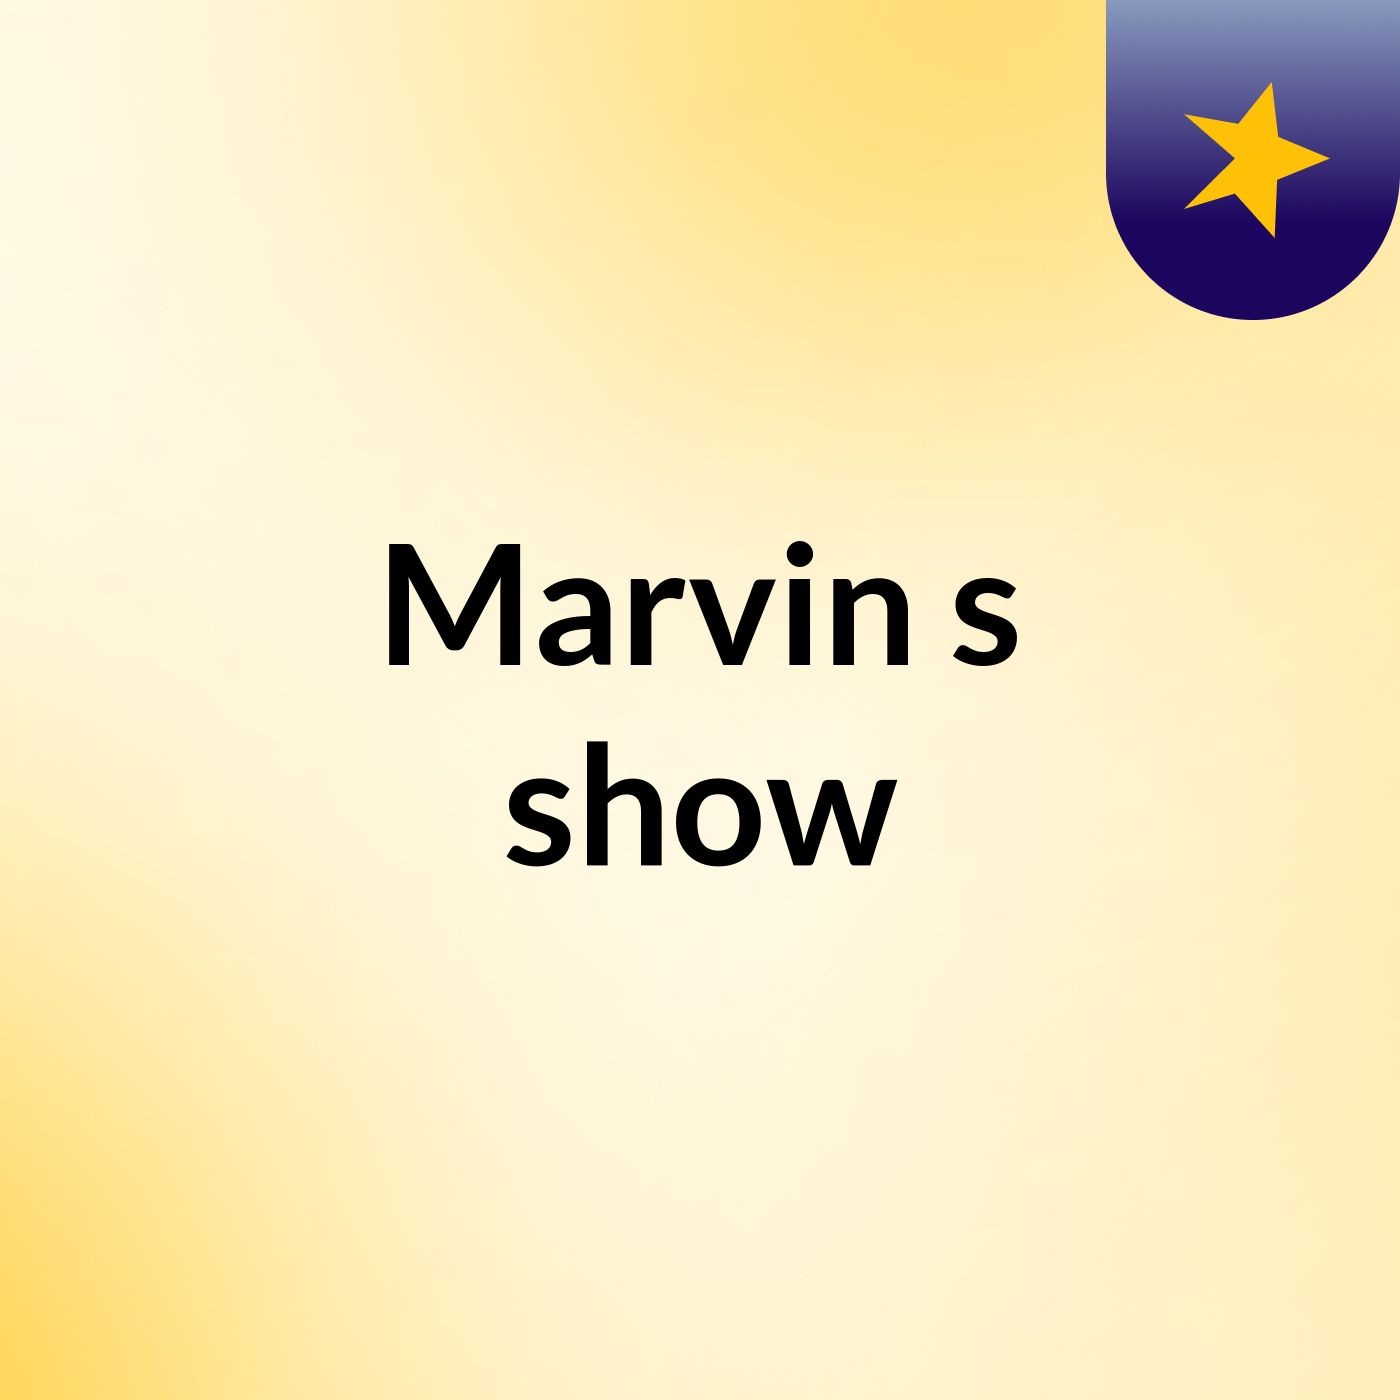 Marvin's show